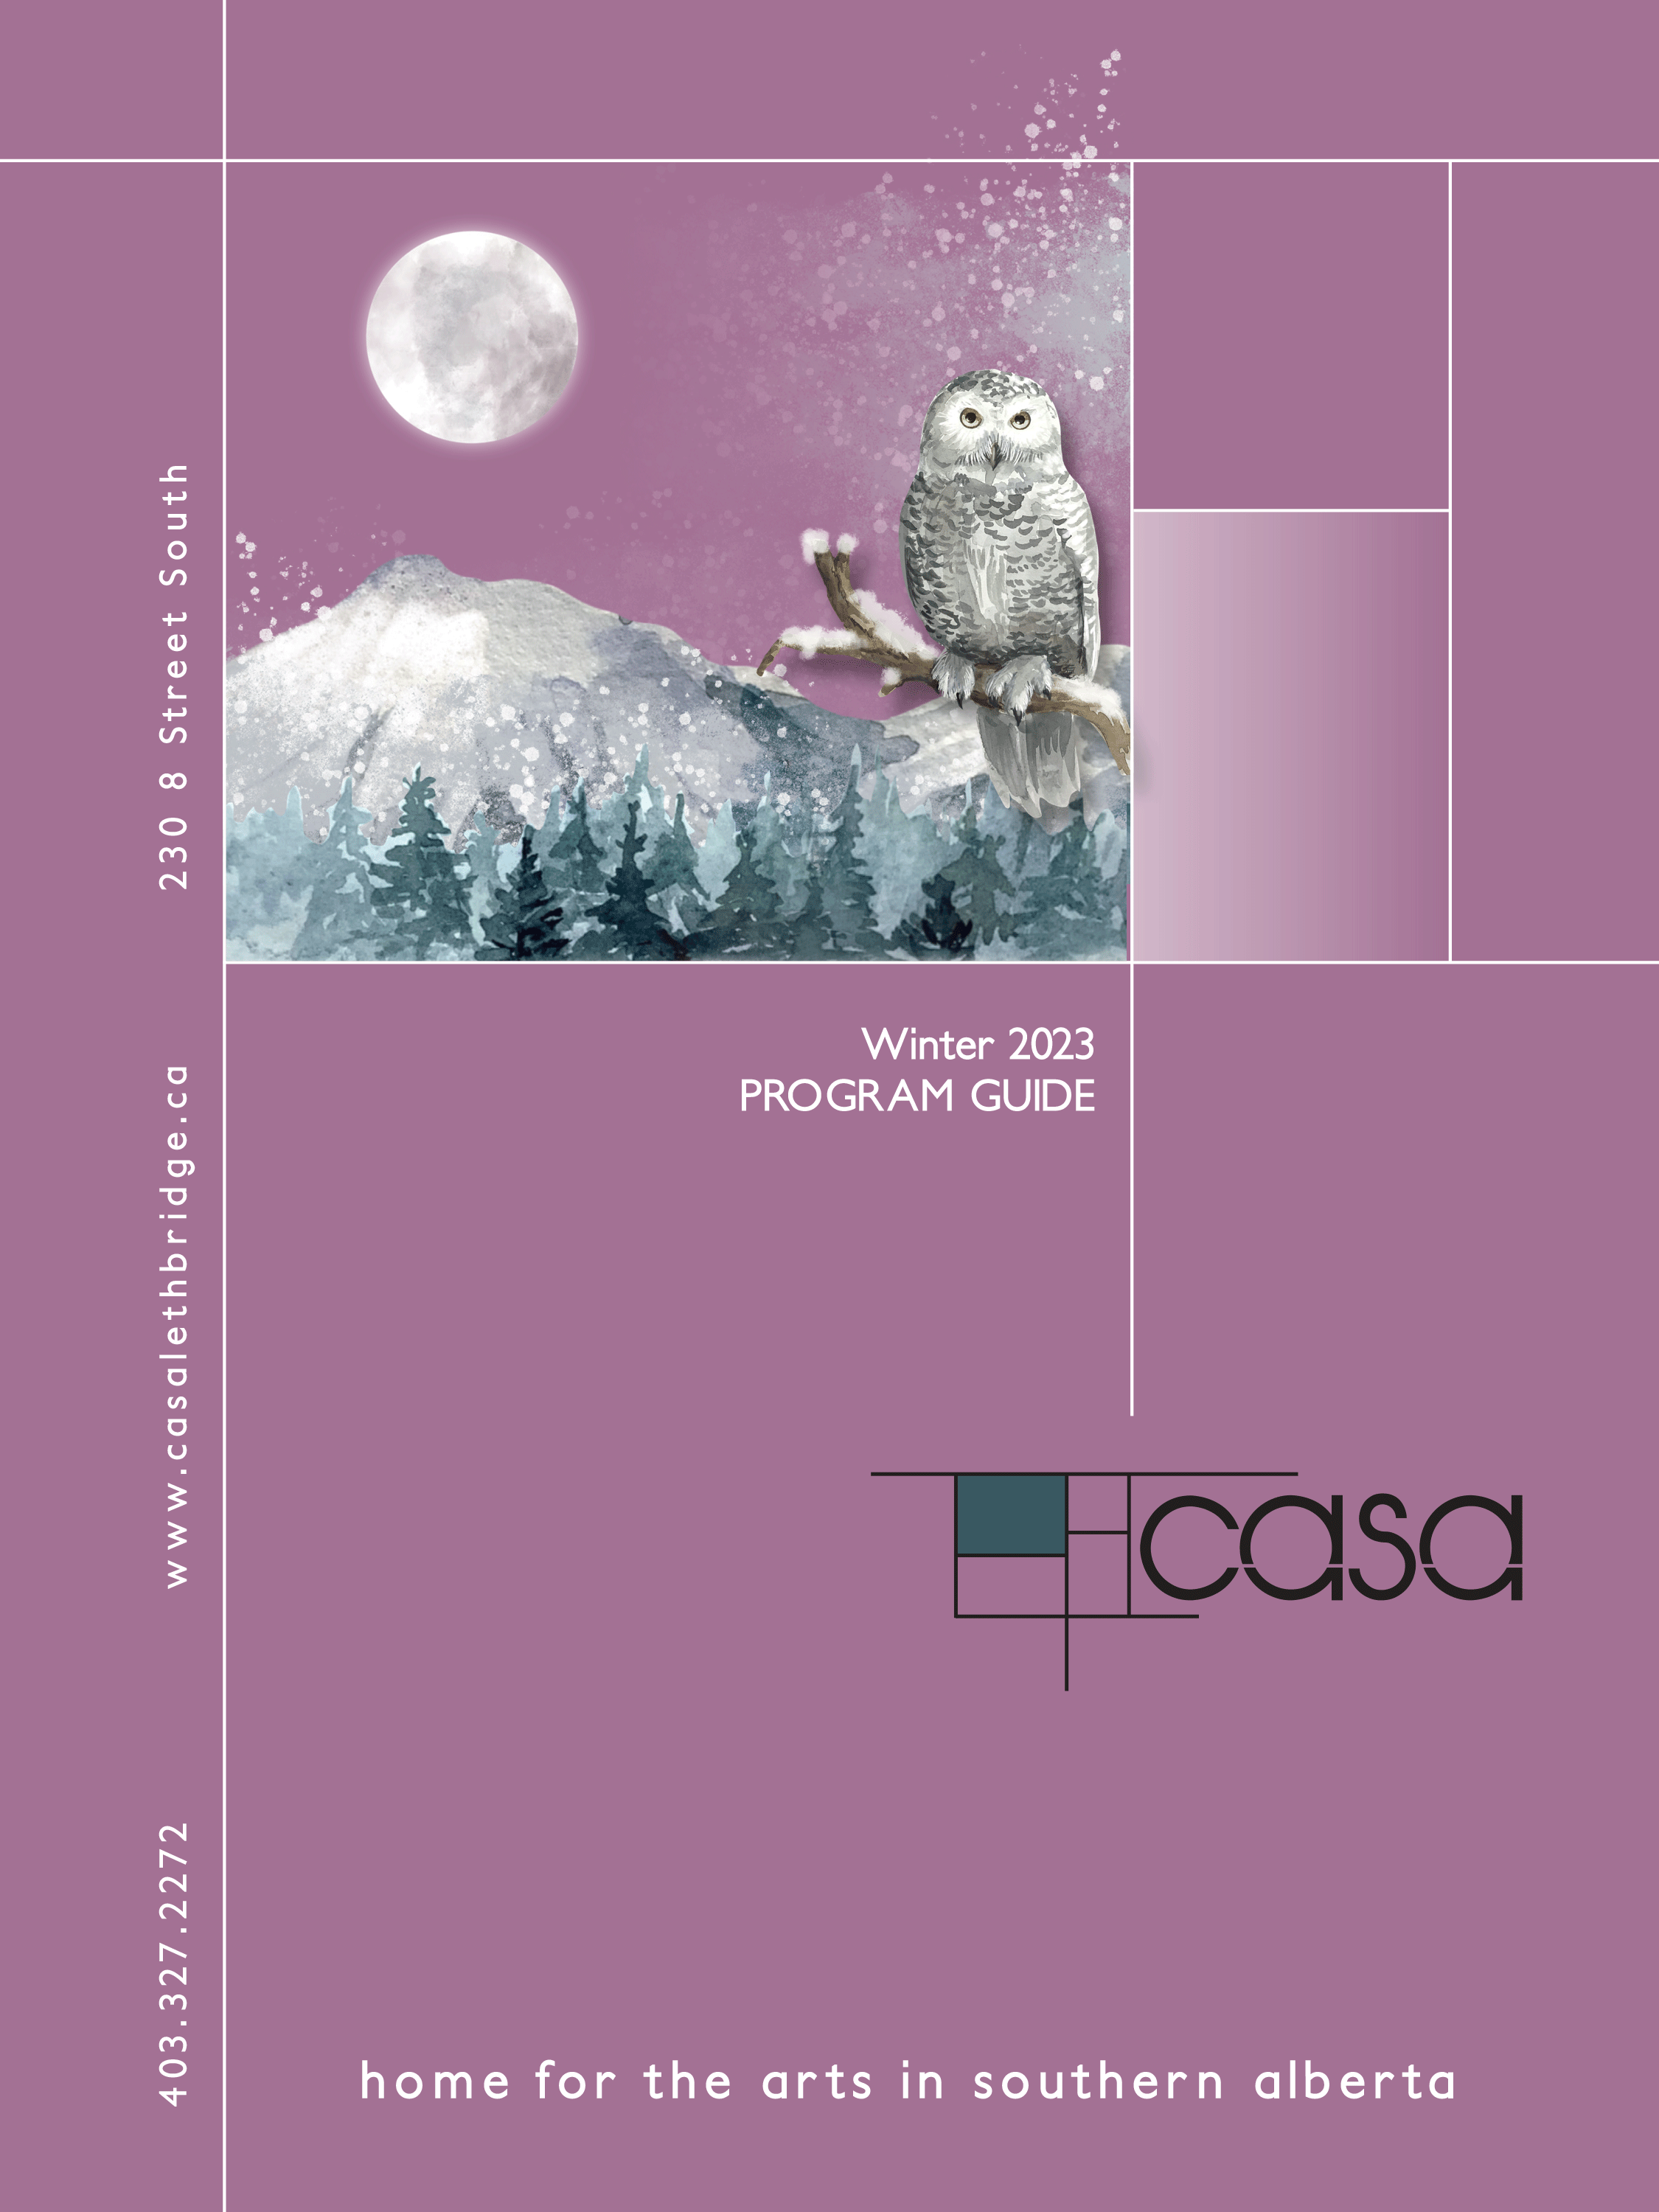 Casa 2023 Winter Program Guide in purple with a snowy owl in front of a full moon.